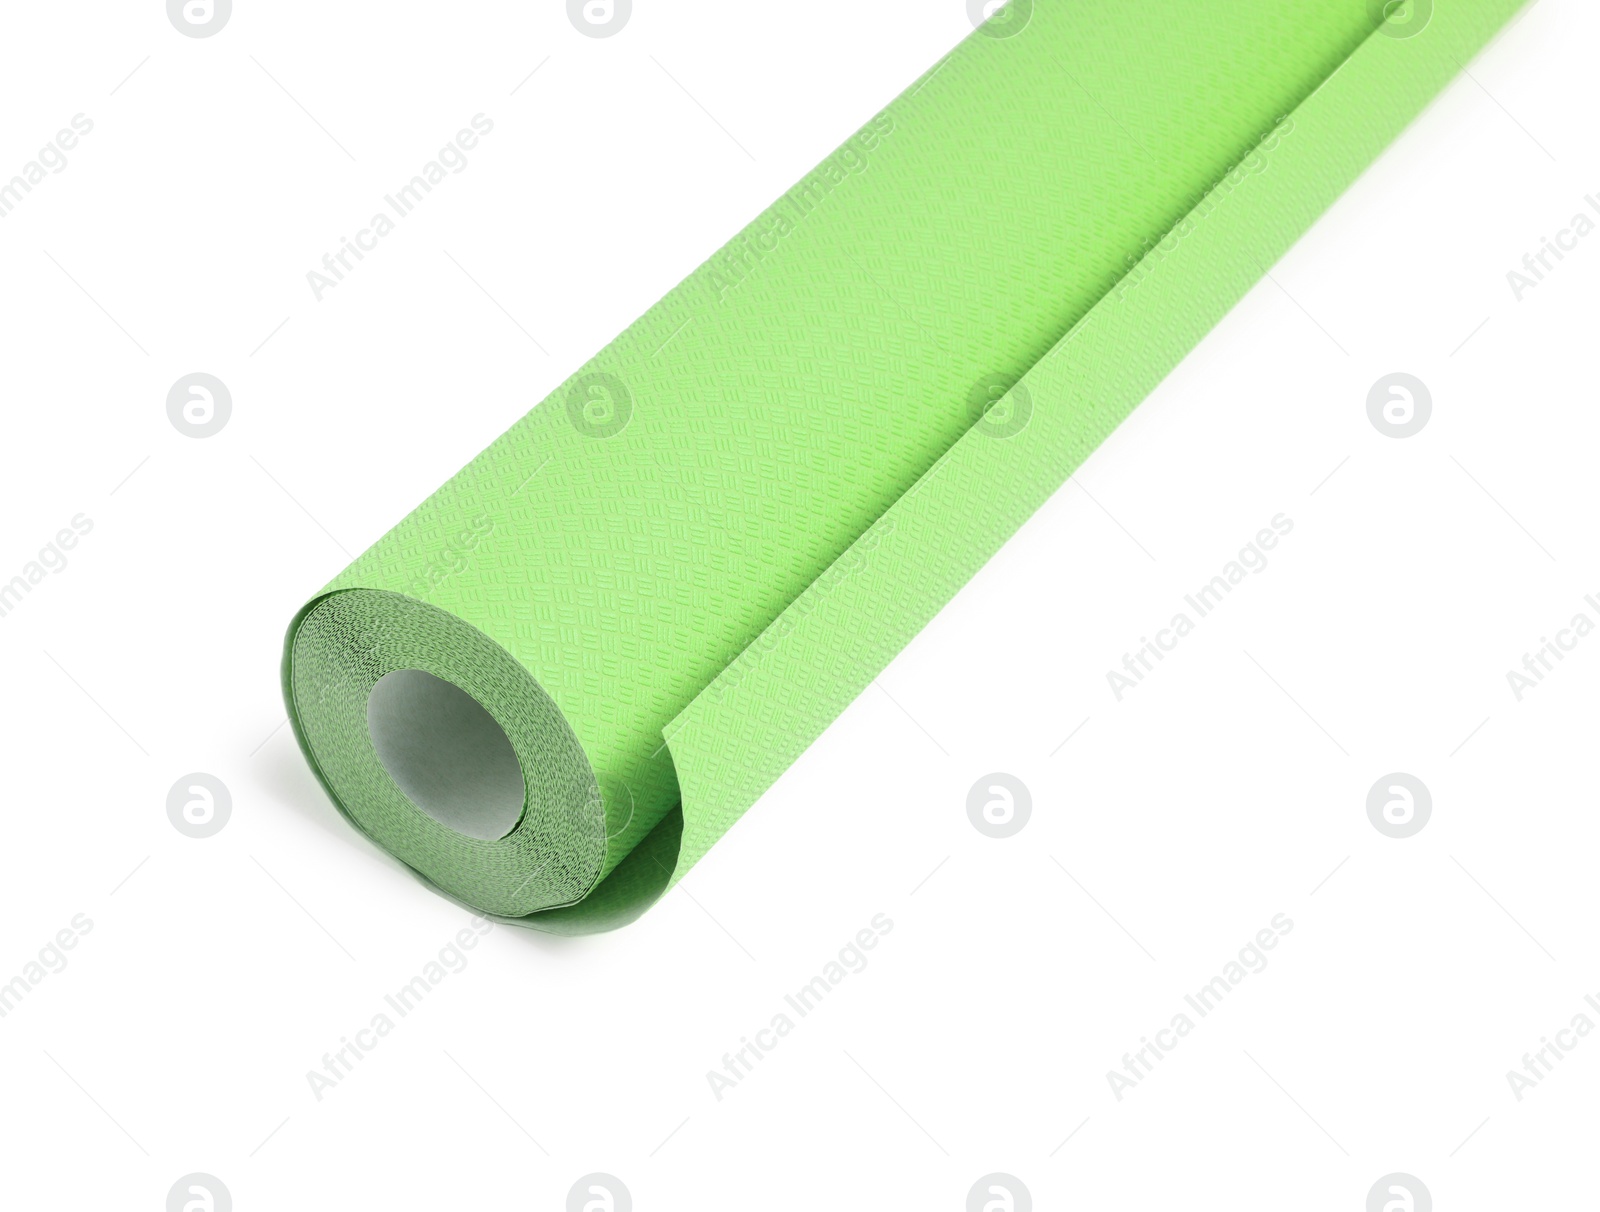 Image of One light green wallpaper roll isolated on white